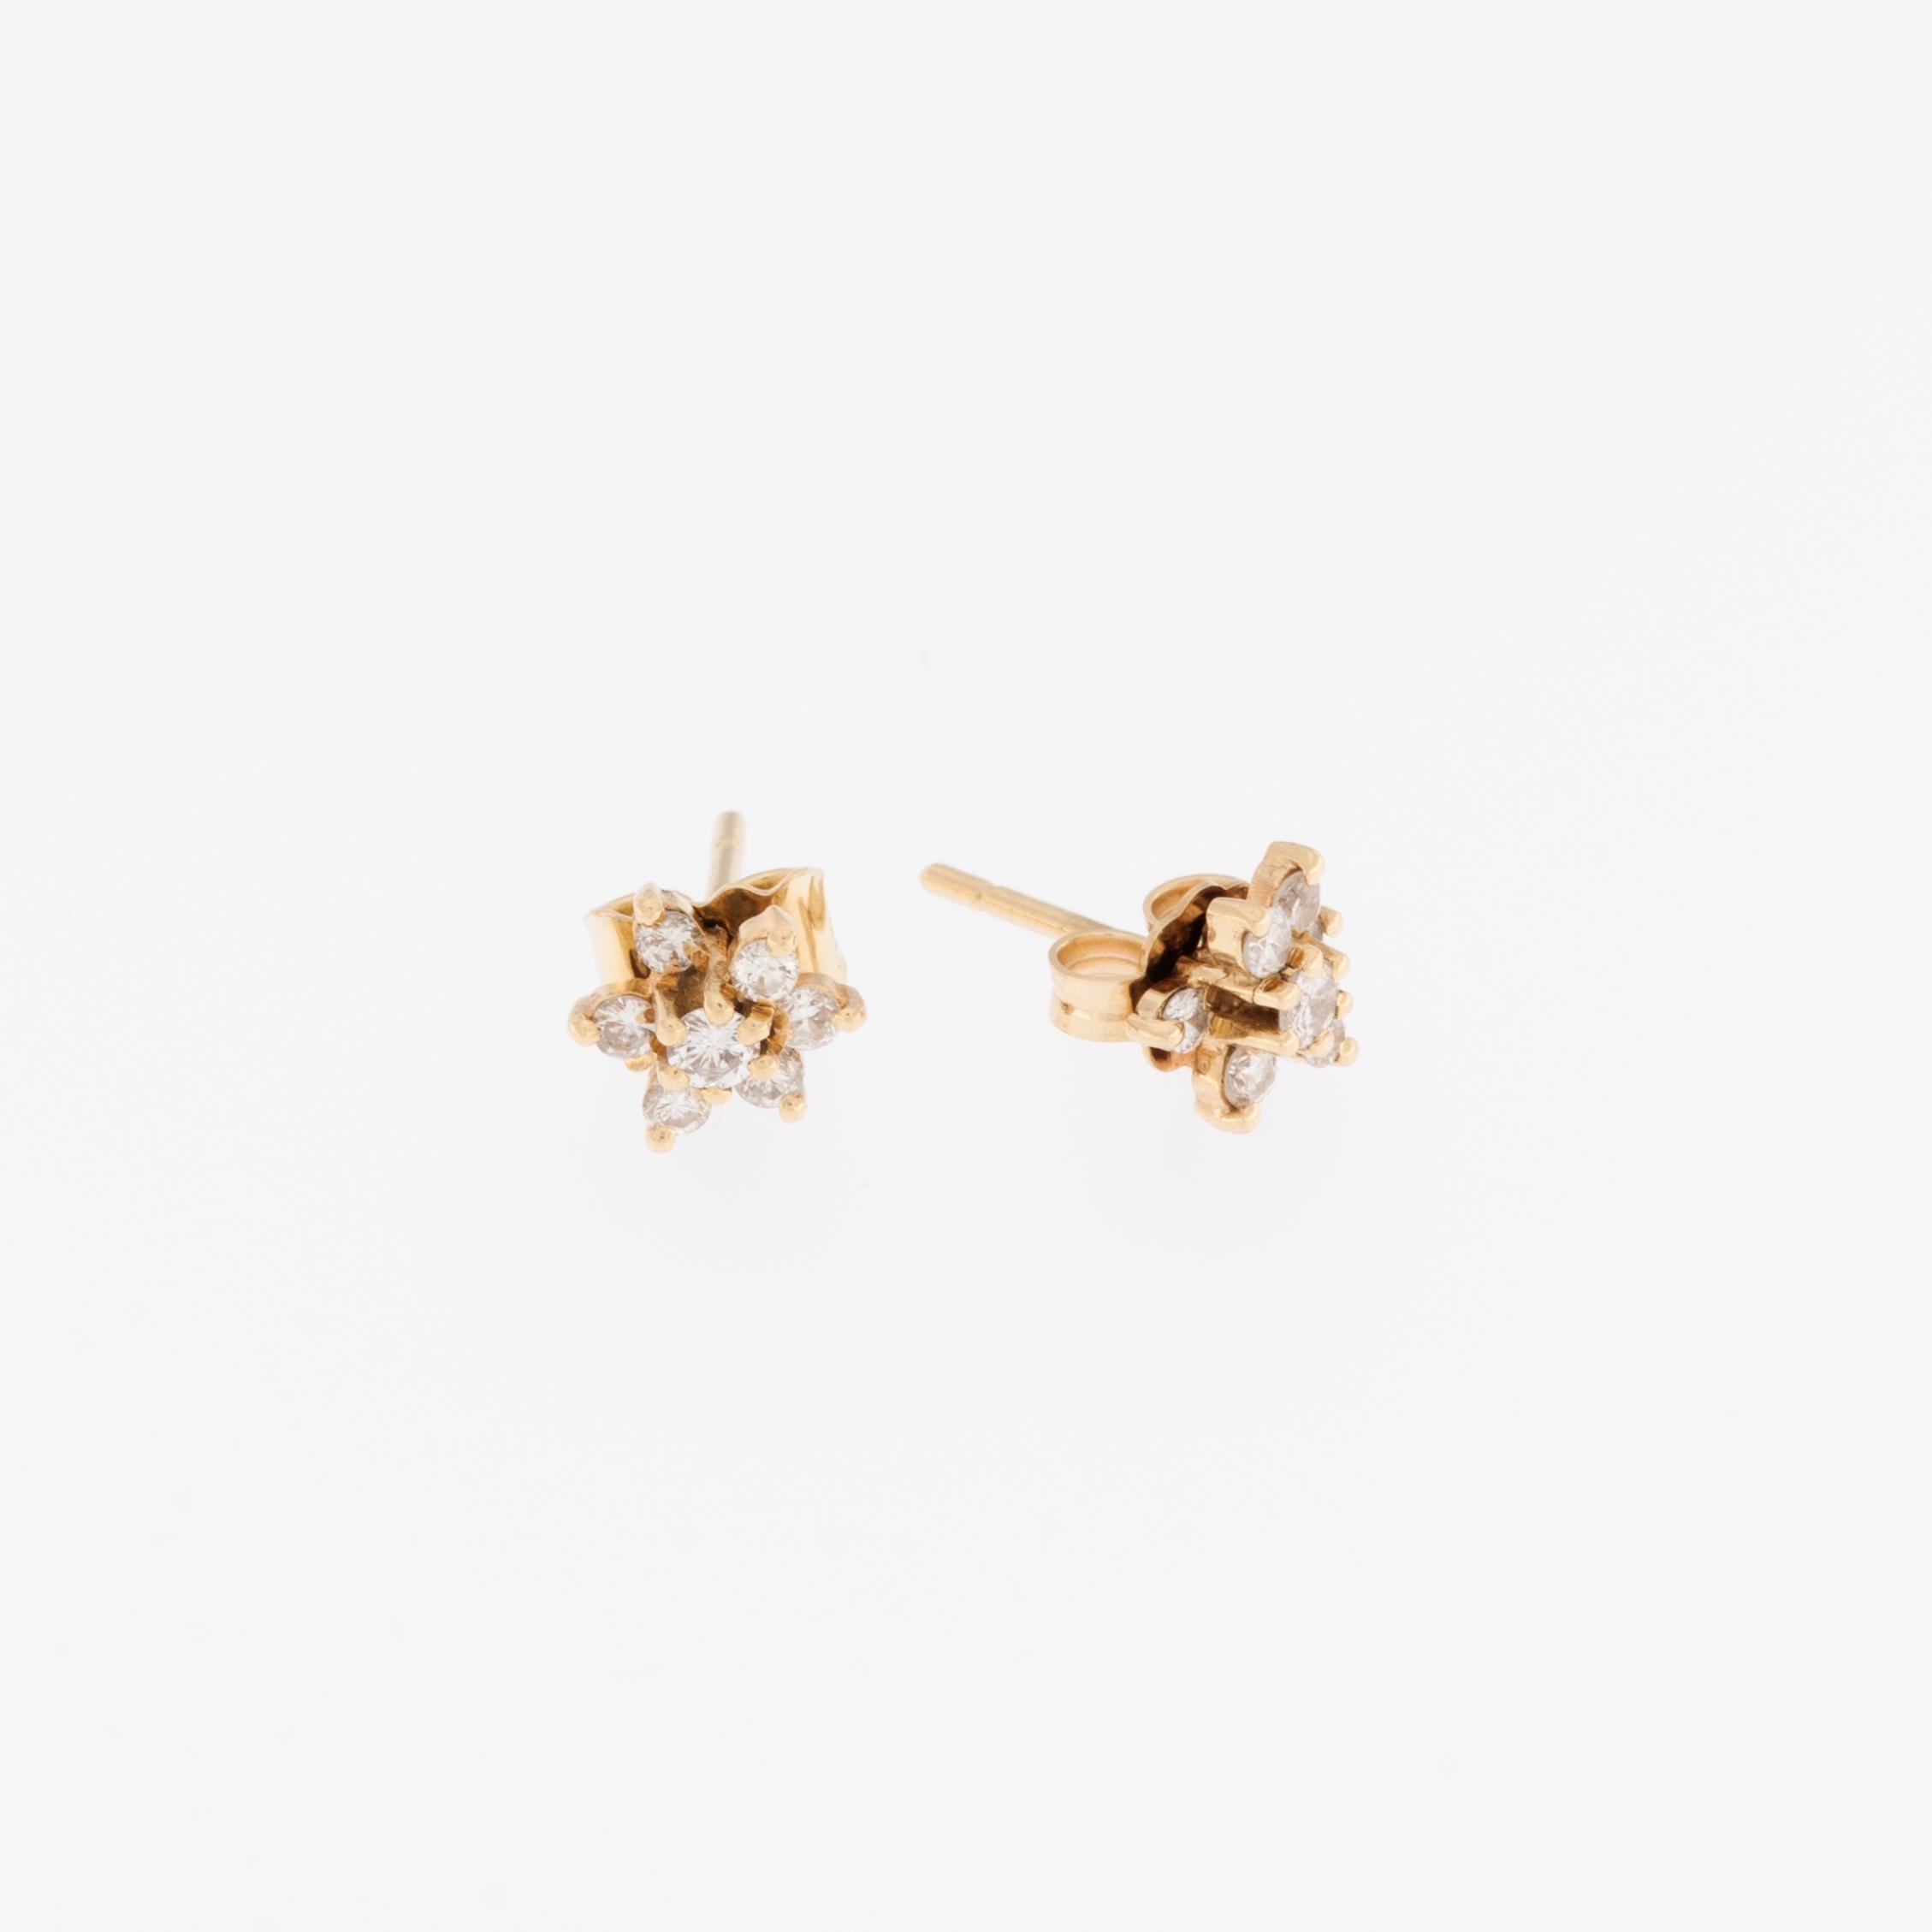 This pair of exquisite French 18kt Yellow Gold Diamond Earrings blend sophistication and timeless elegance. Crafted with precision and attention to detail, these earrings showcase the artistry of French jewelry design.

The base of each earring is